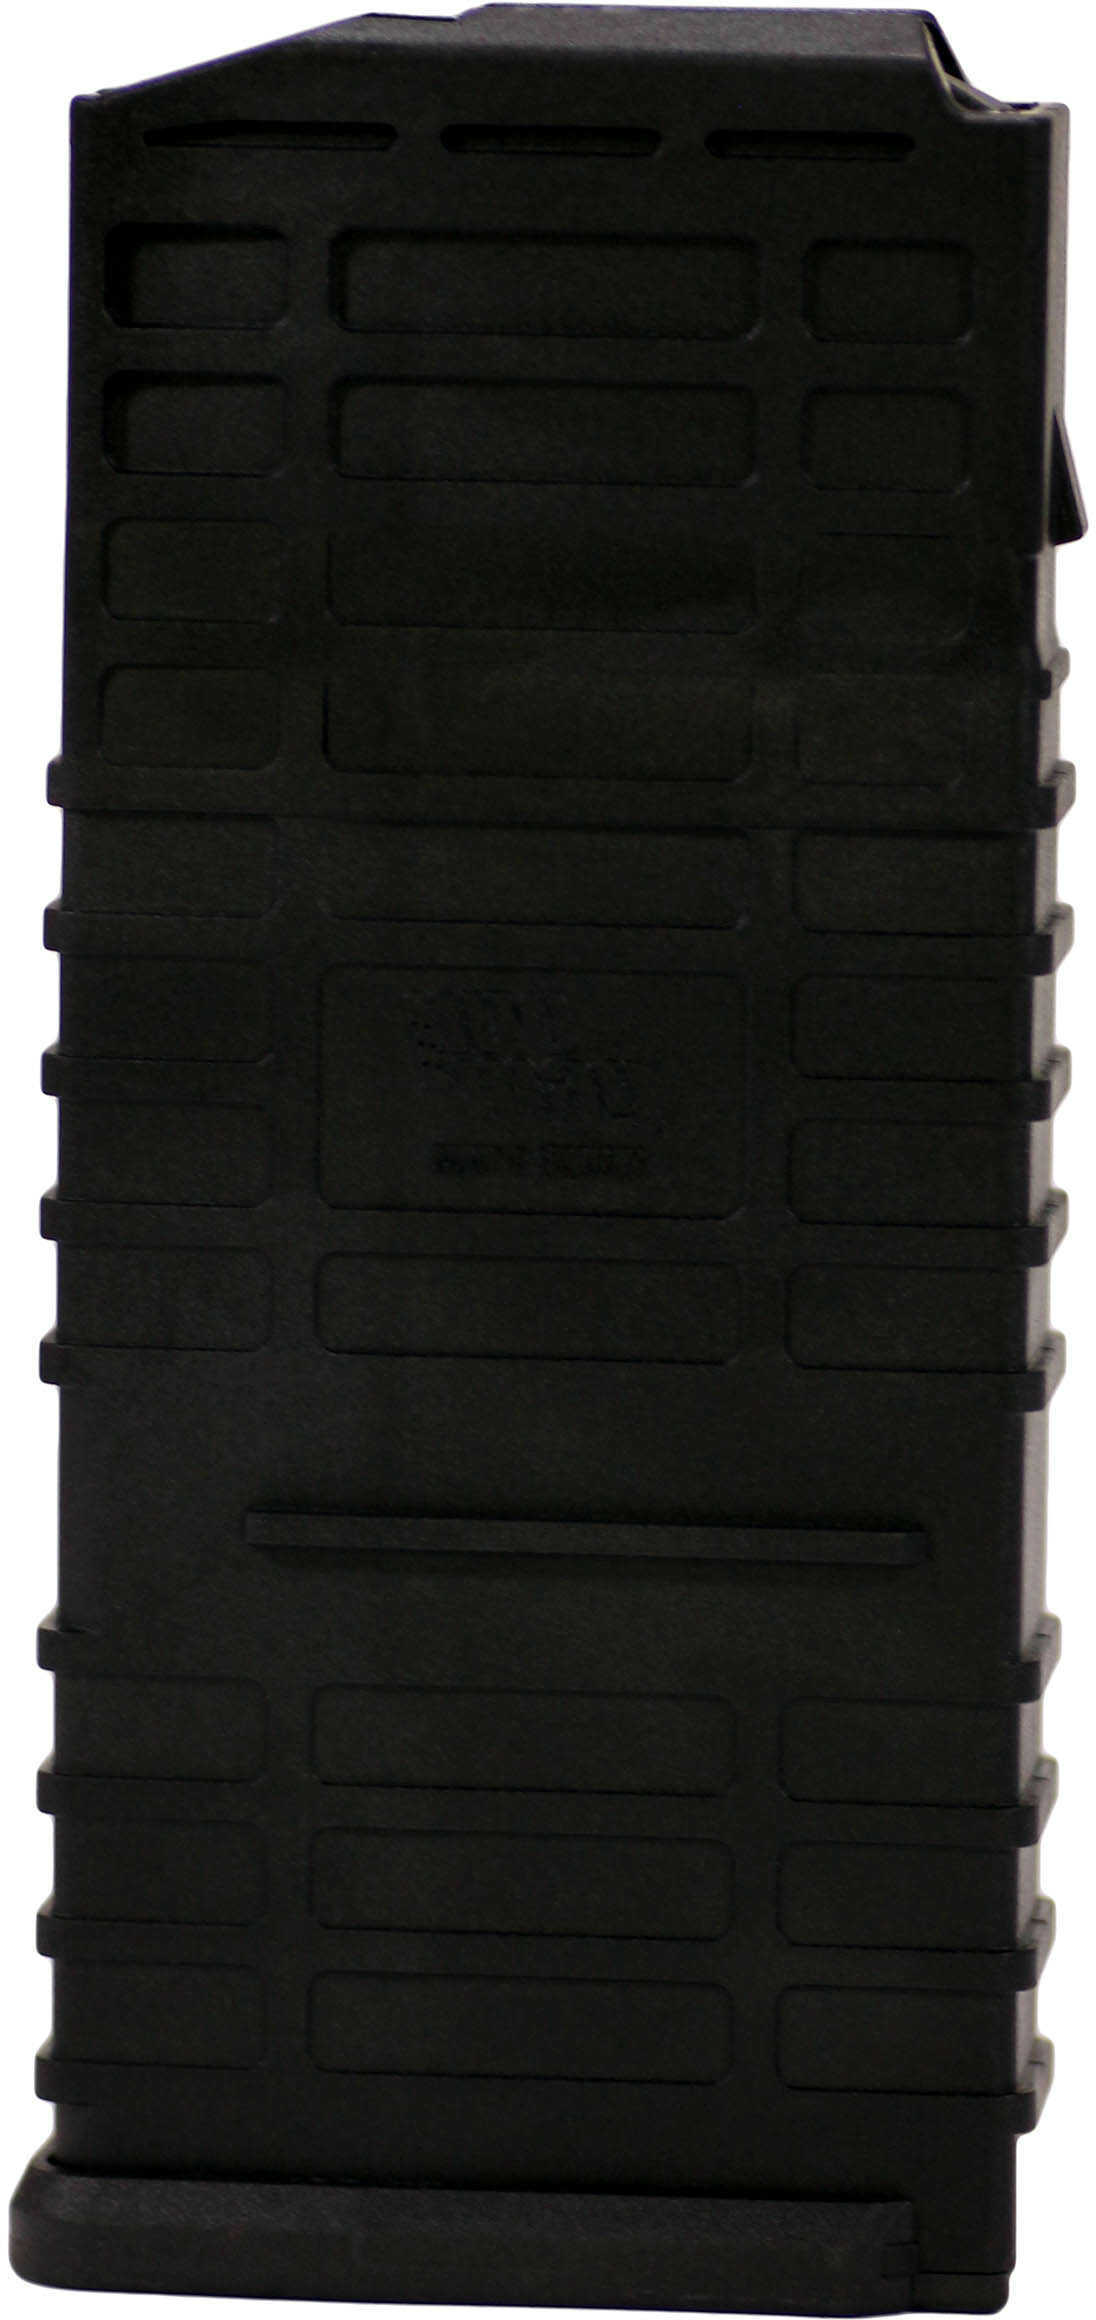 ProMag Ruger Scout Magazine, .308, 20 Rounds, Black Polymer Md: RUG-A39